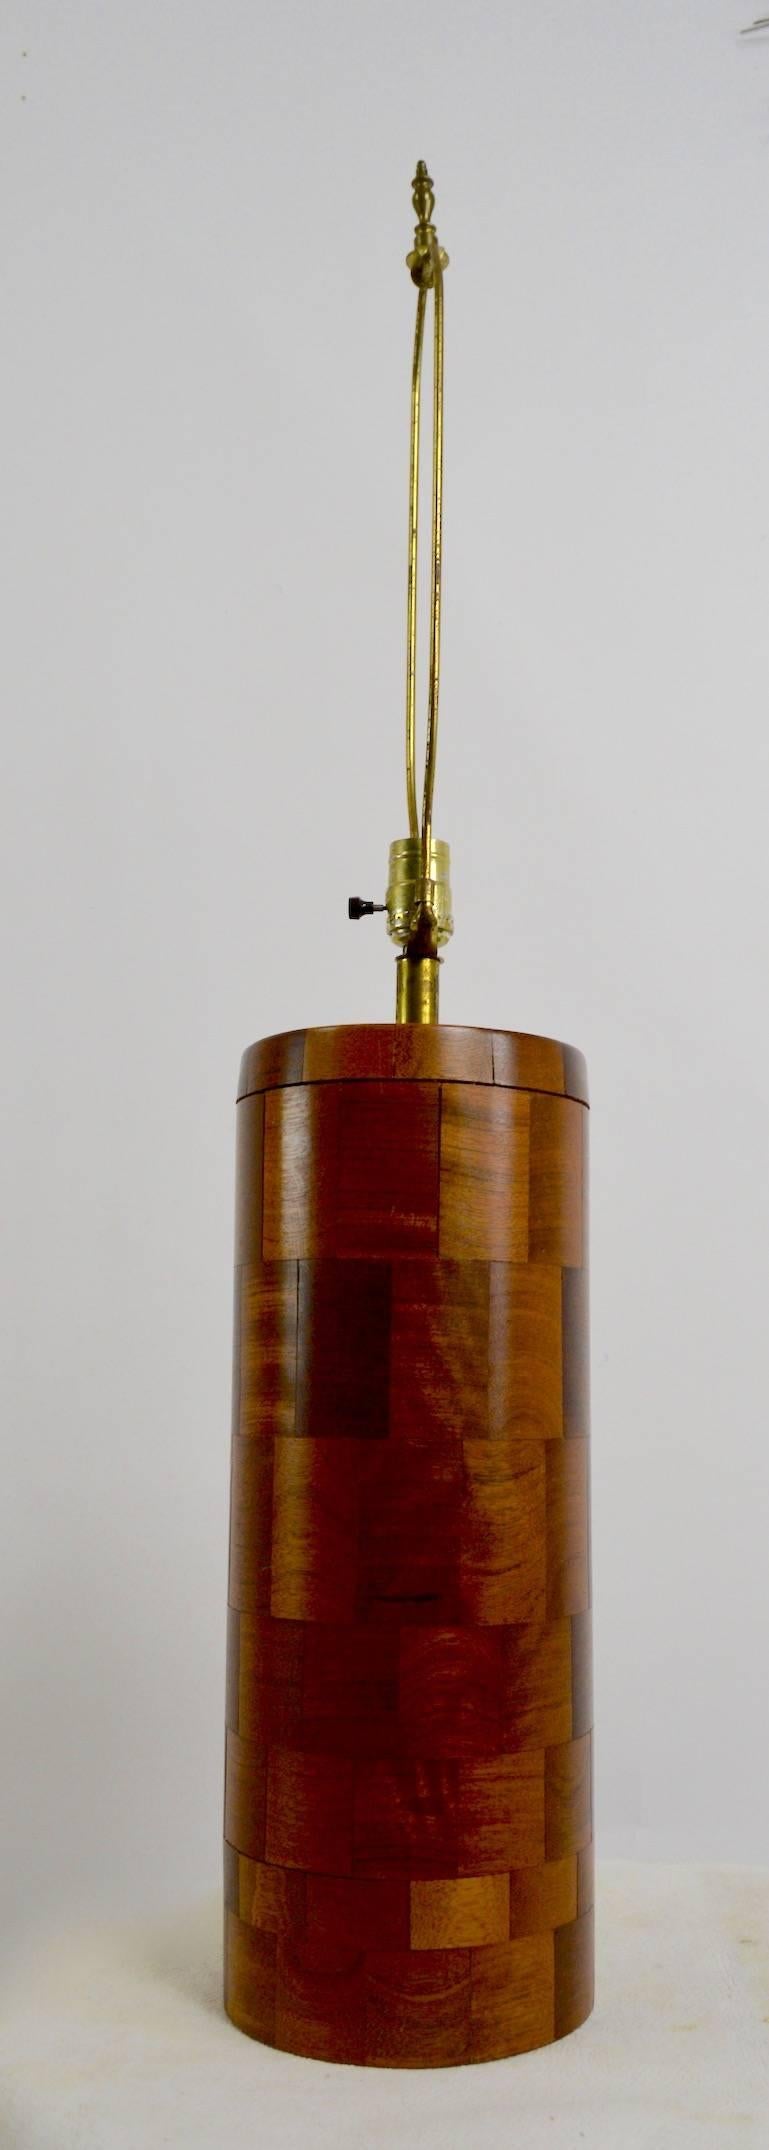 Cylindrical wood lamp of stacked wood construction, in the style of Phillip Powell. This lamp is in good original, working condition, the shade shown is not included. Height to top of wood body 18 inches. Nice example of craft in the Modernist idiom.